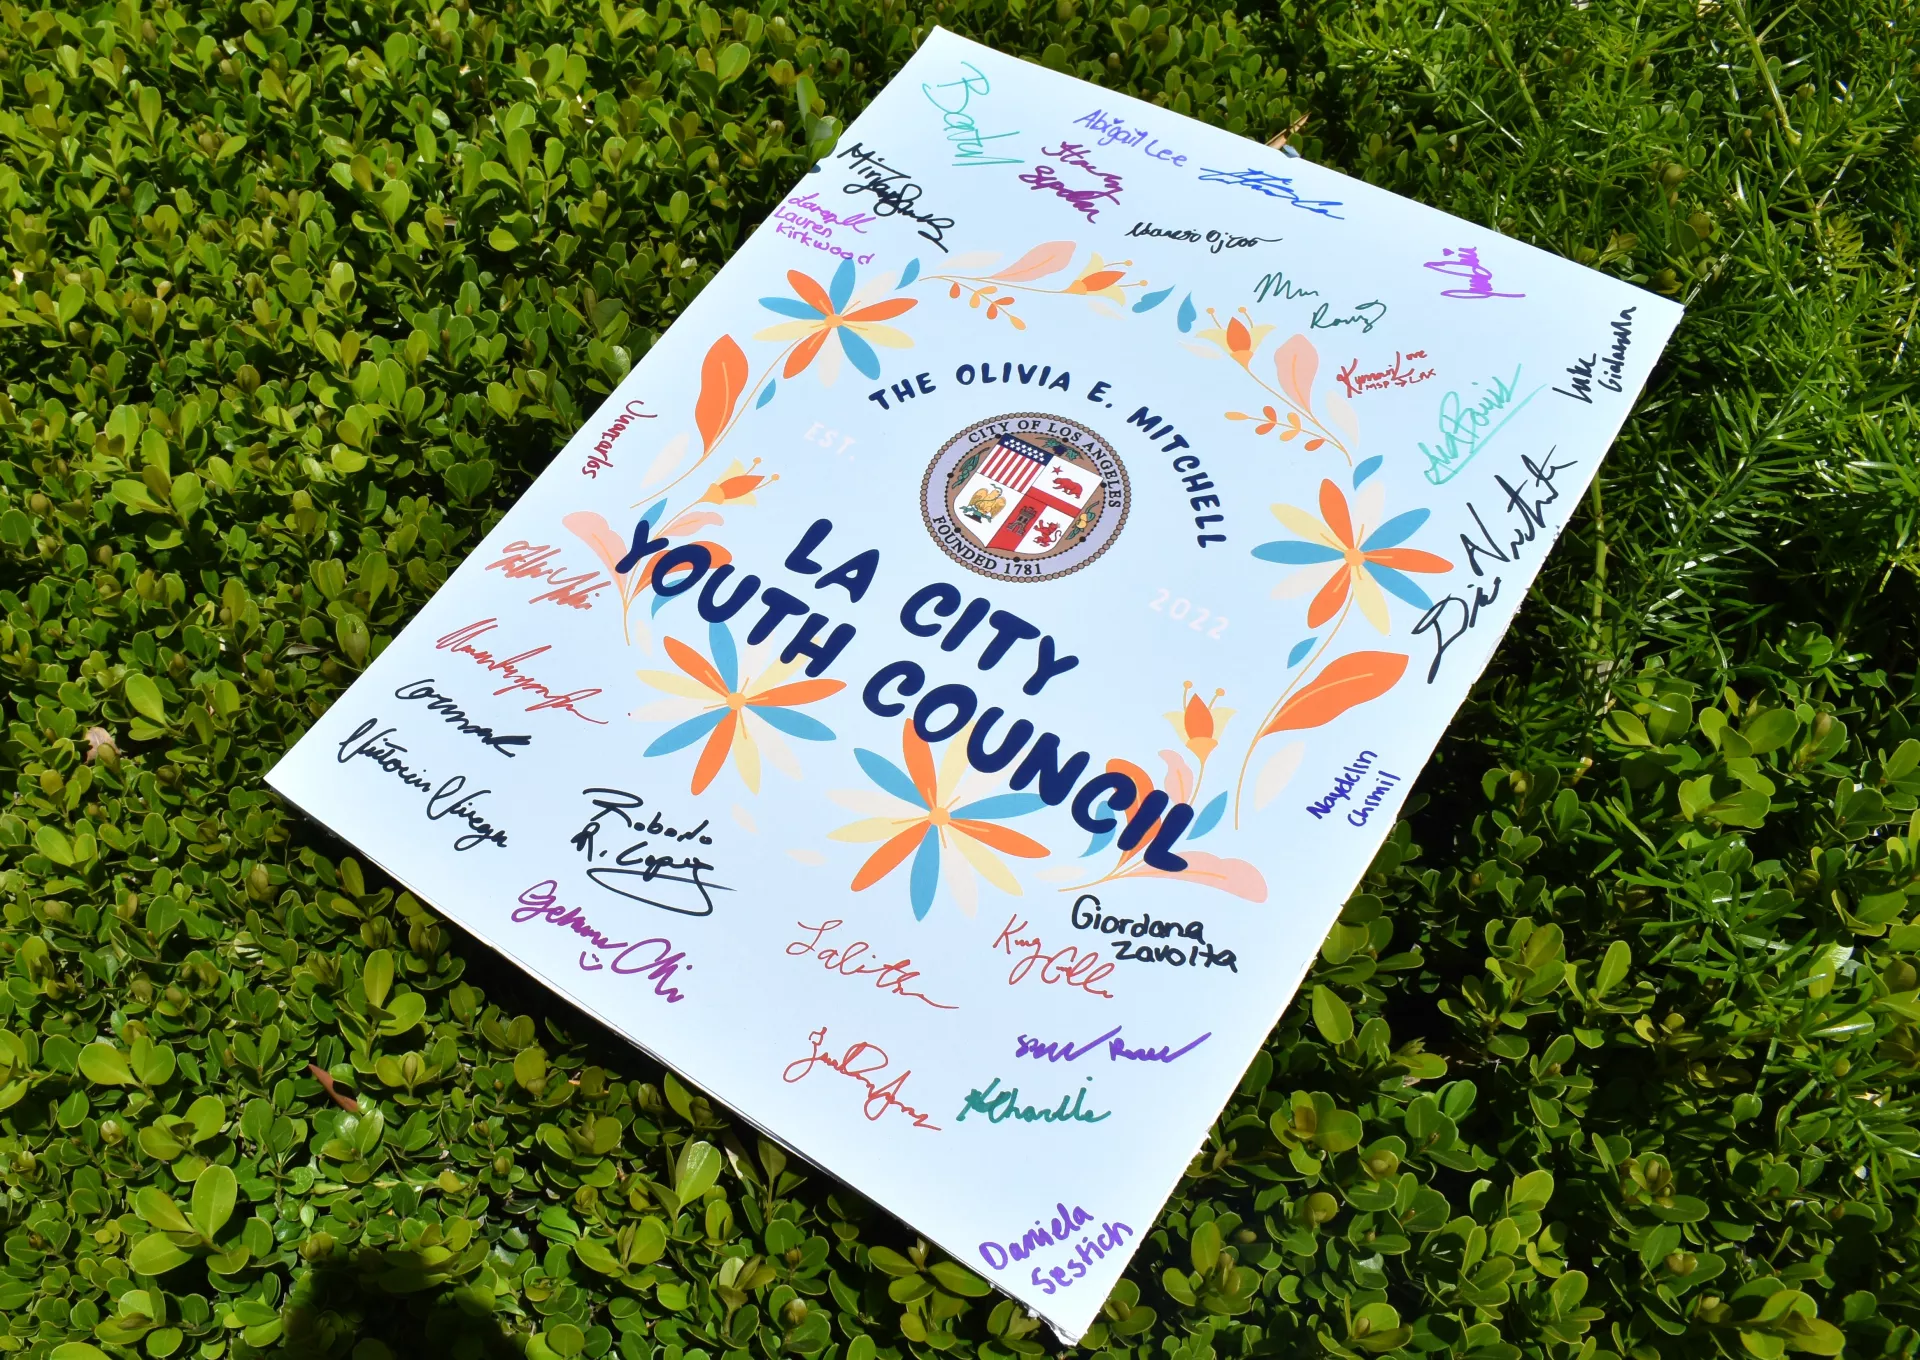 Signed poster of the Olivia E. Mitchell L.A. City Youth Council. 